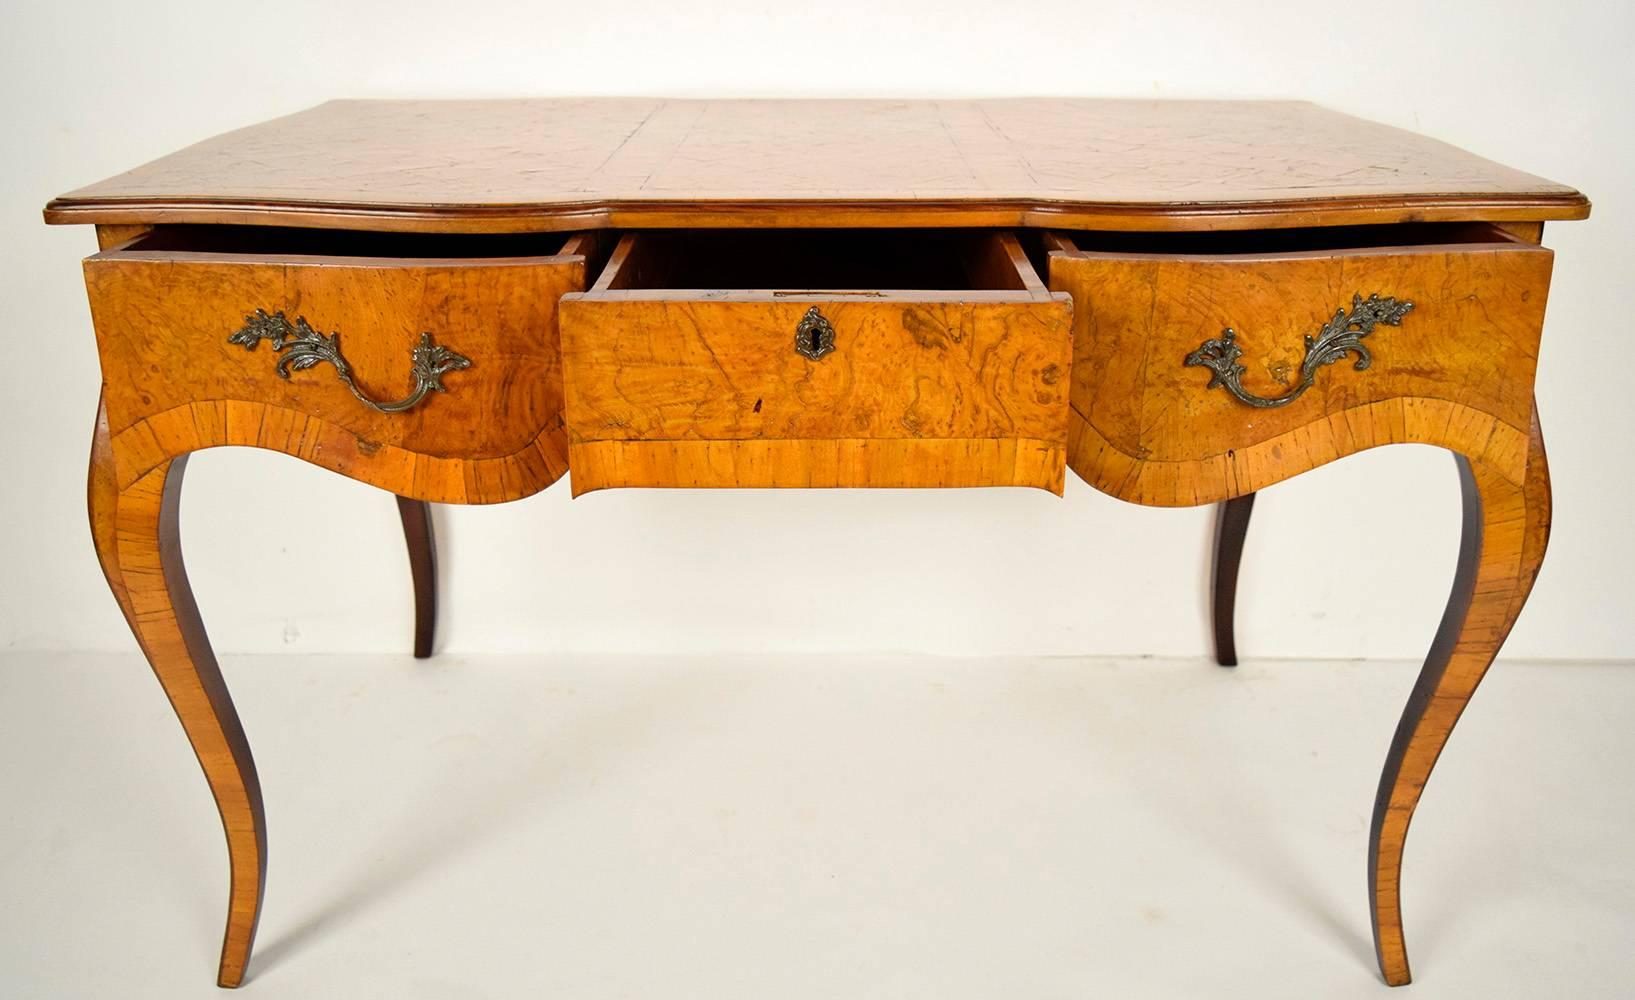 This is a 1900s Louis XV-style desk made from solid wood with beautiful marquetry decorations on top and inlaid burl and walnut veneers on the sides and legs with its original golden finish. The front of the desk has three side by side drawers with